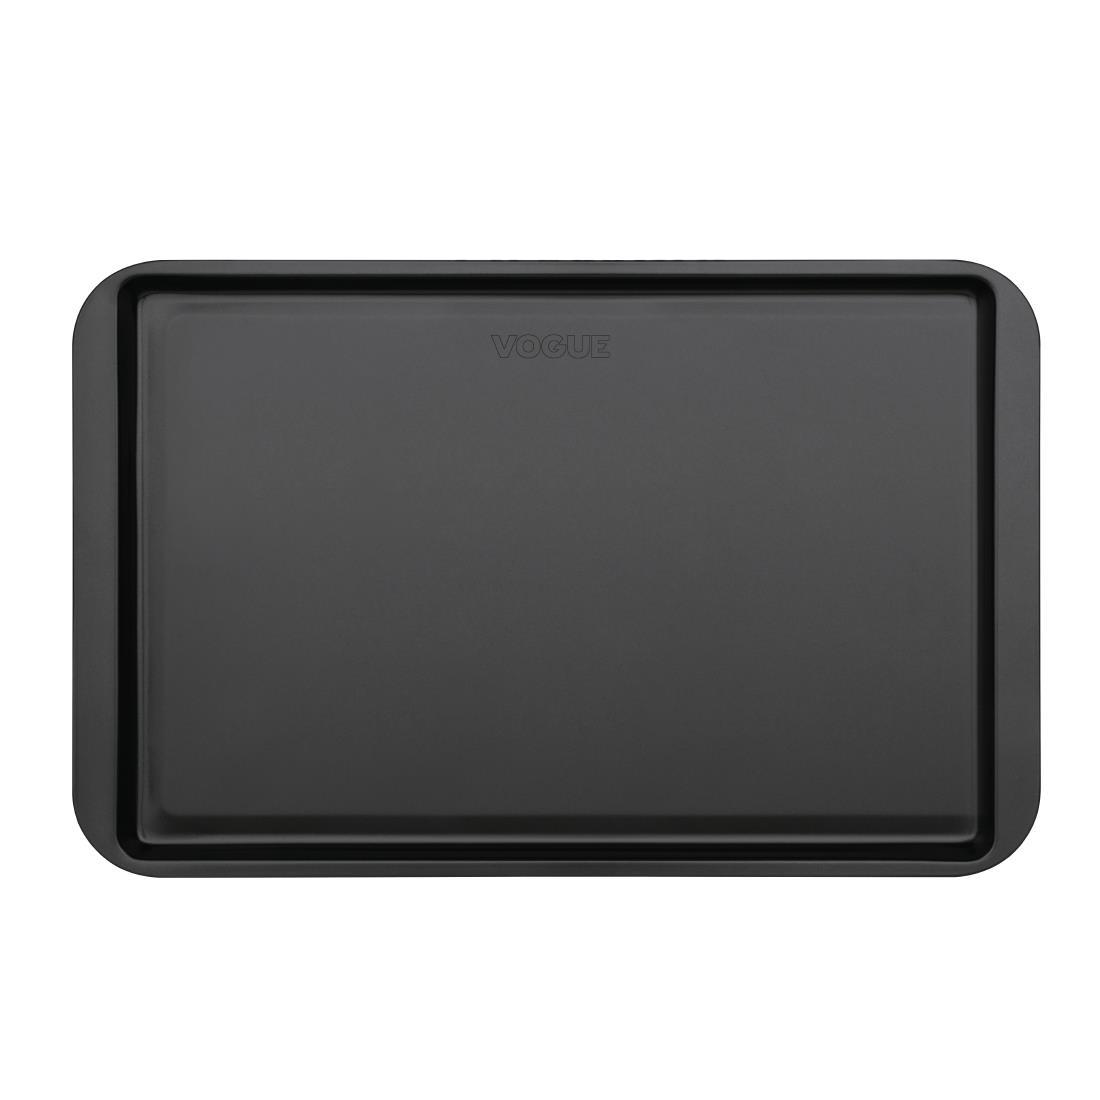 Vogue Non-Stick Carbon Steel Baking Tray 430 x 280mm - GD015  - 3